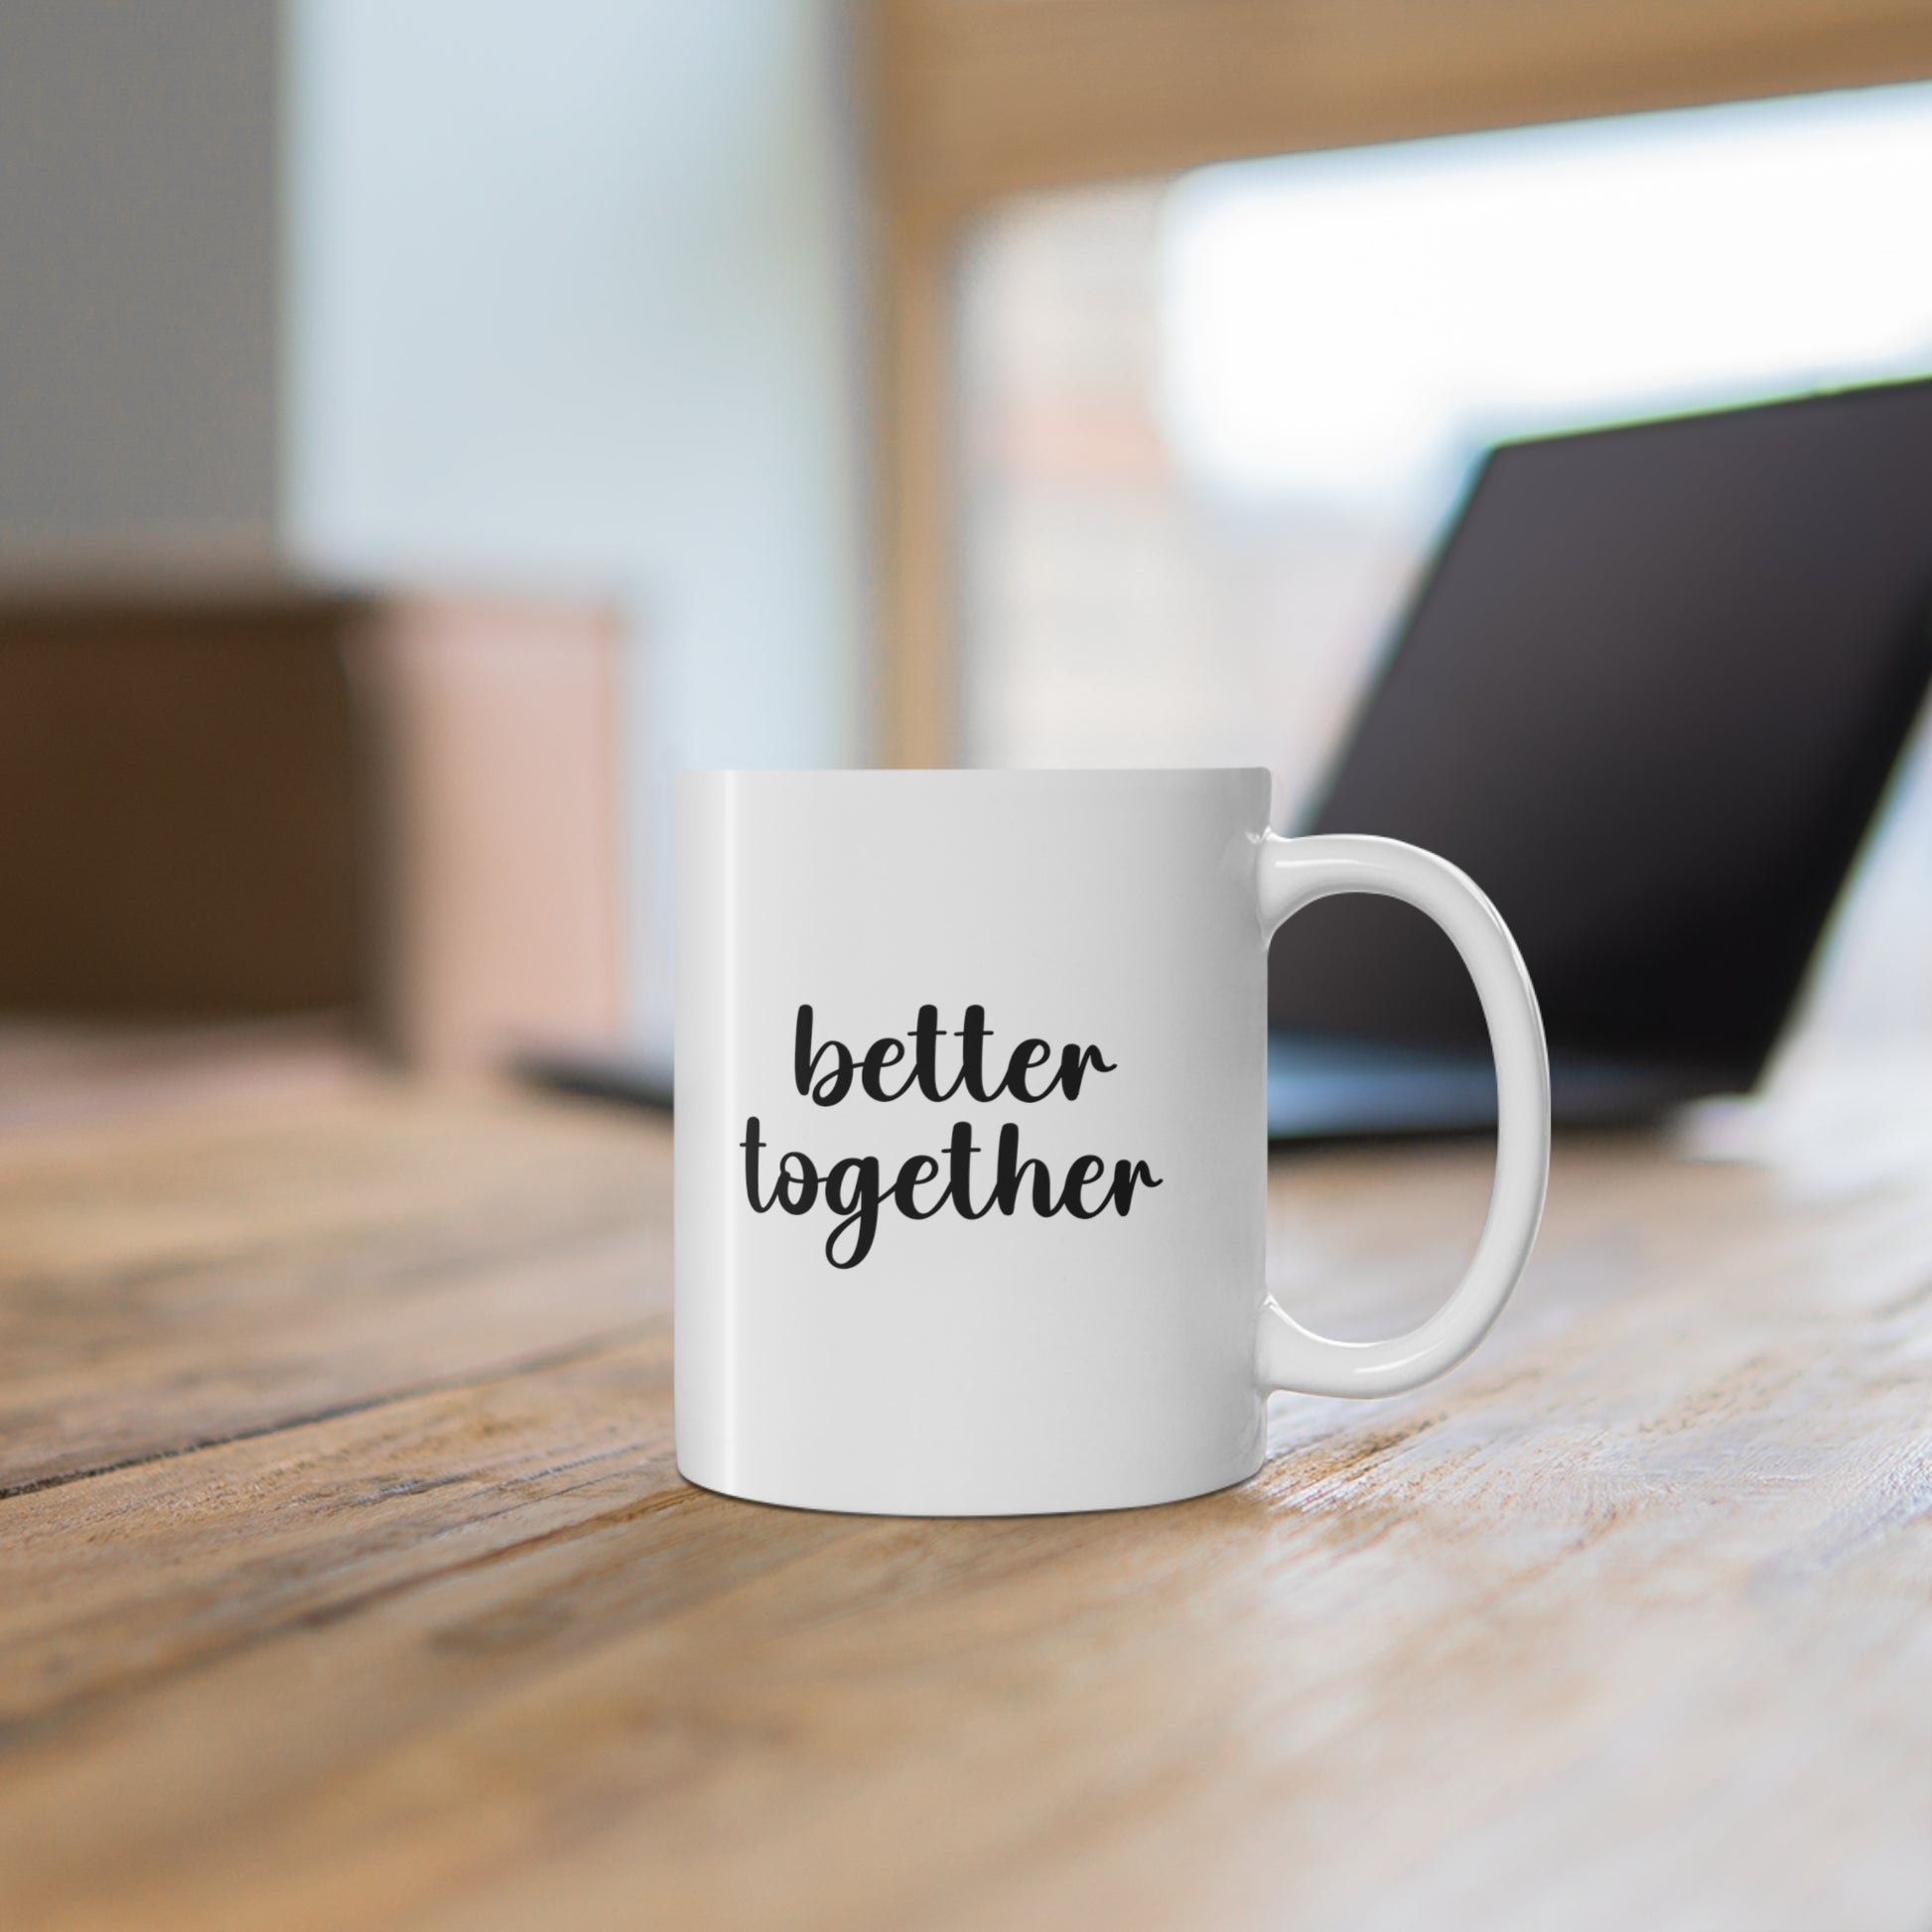 11oz ceramic mug with quote Better Together